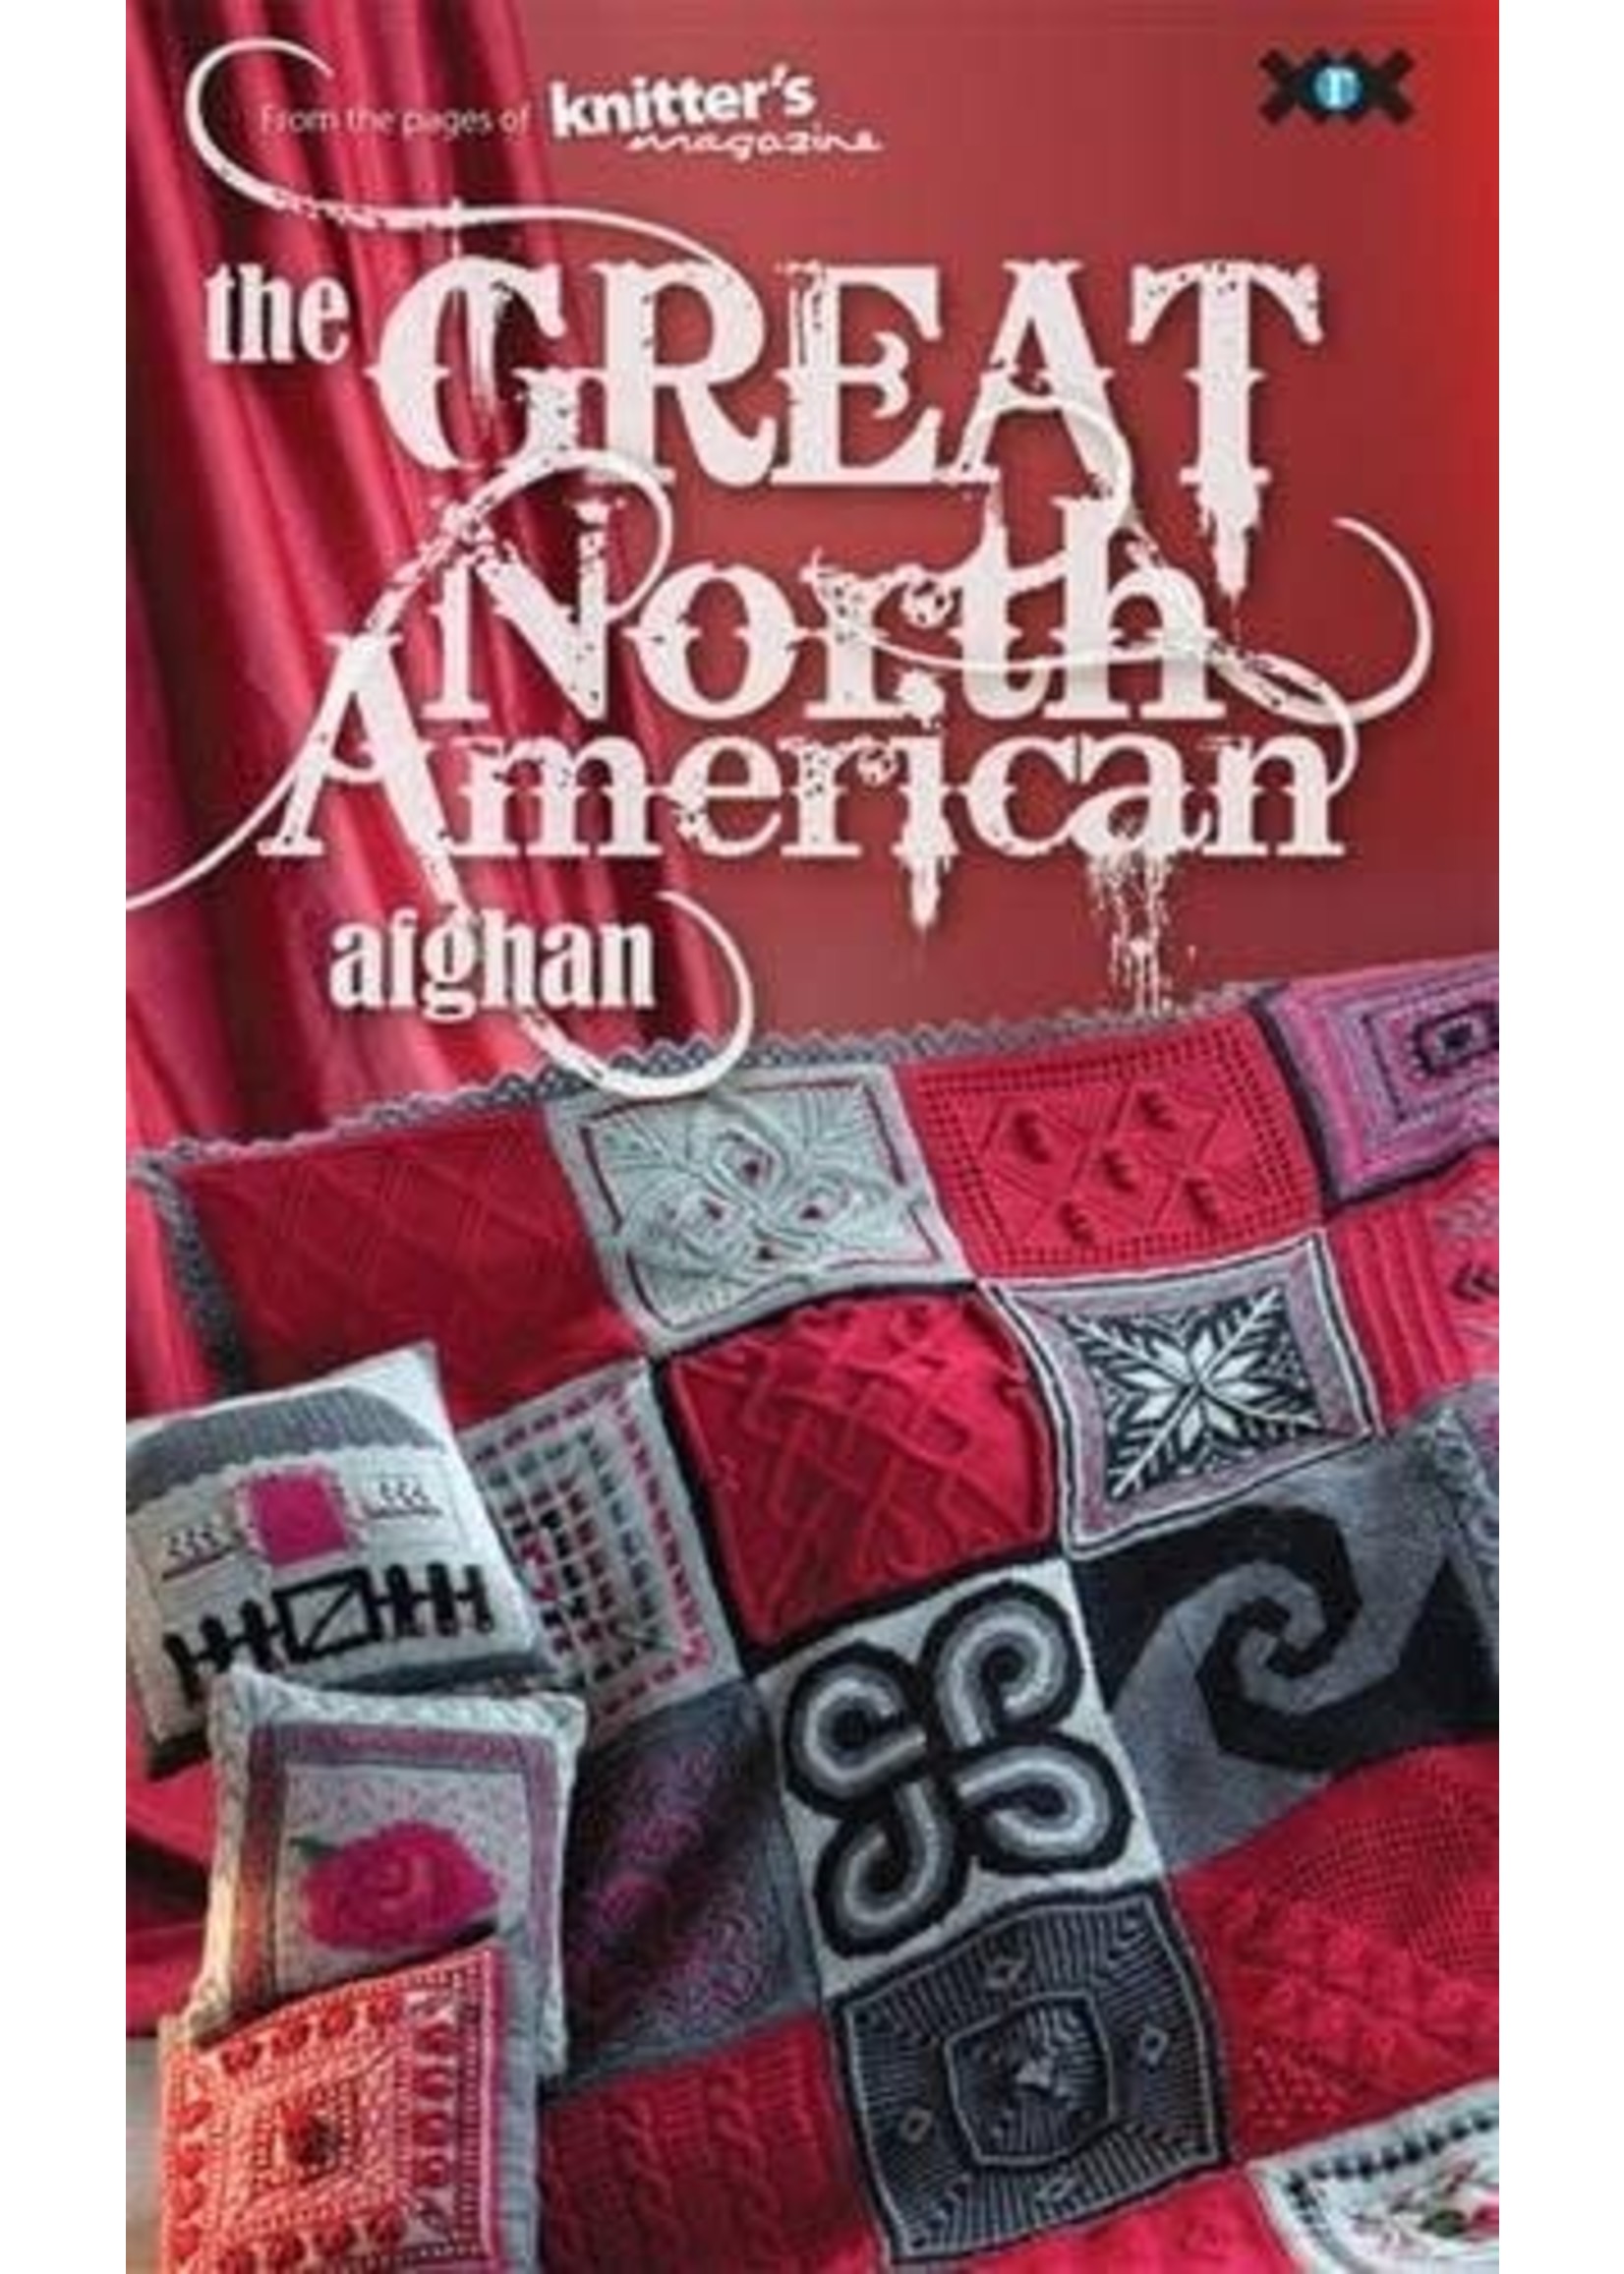 CASCADE THE GREAT NORTH AMERICAN AFGHAN